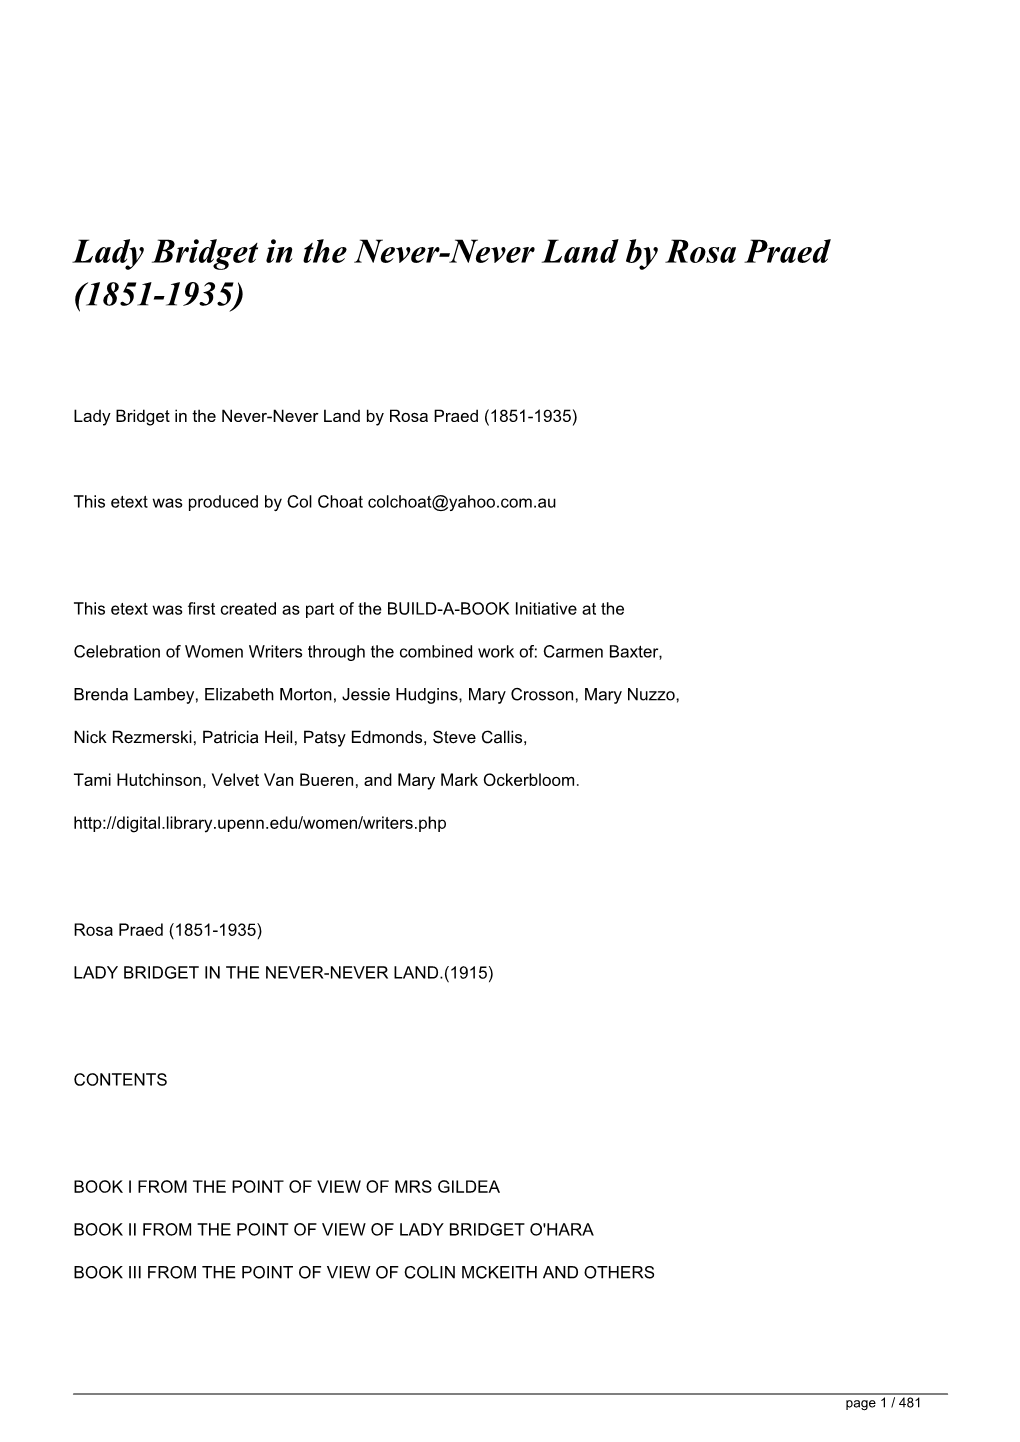 Lady Bridget in the Never-Never Land by Rosa Praed (1851-1935)